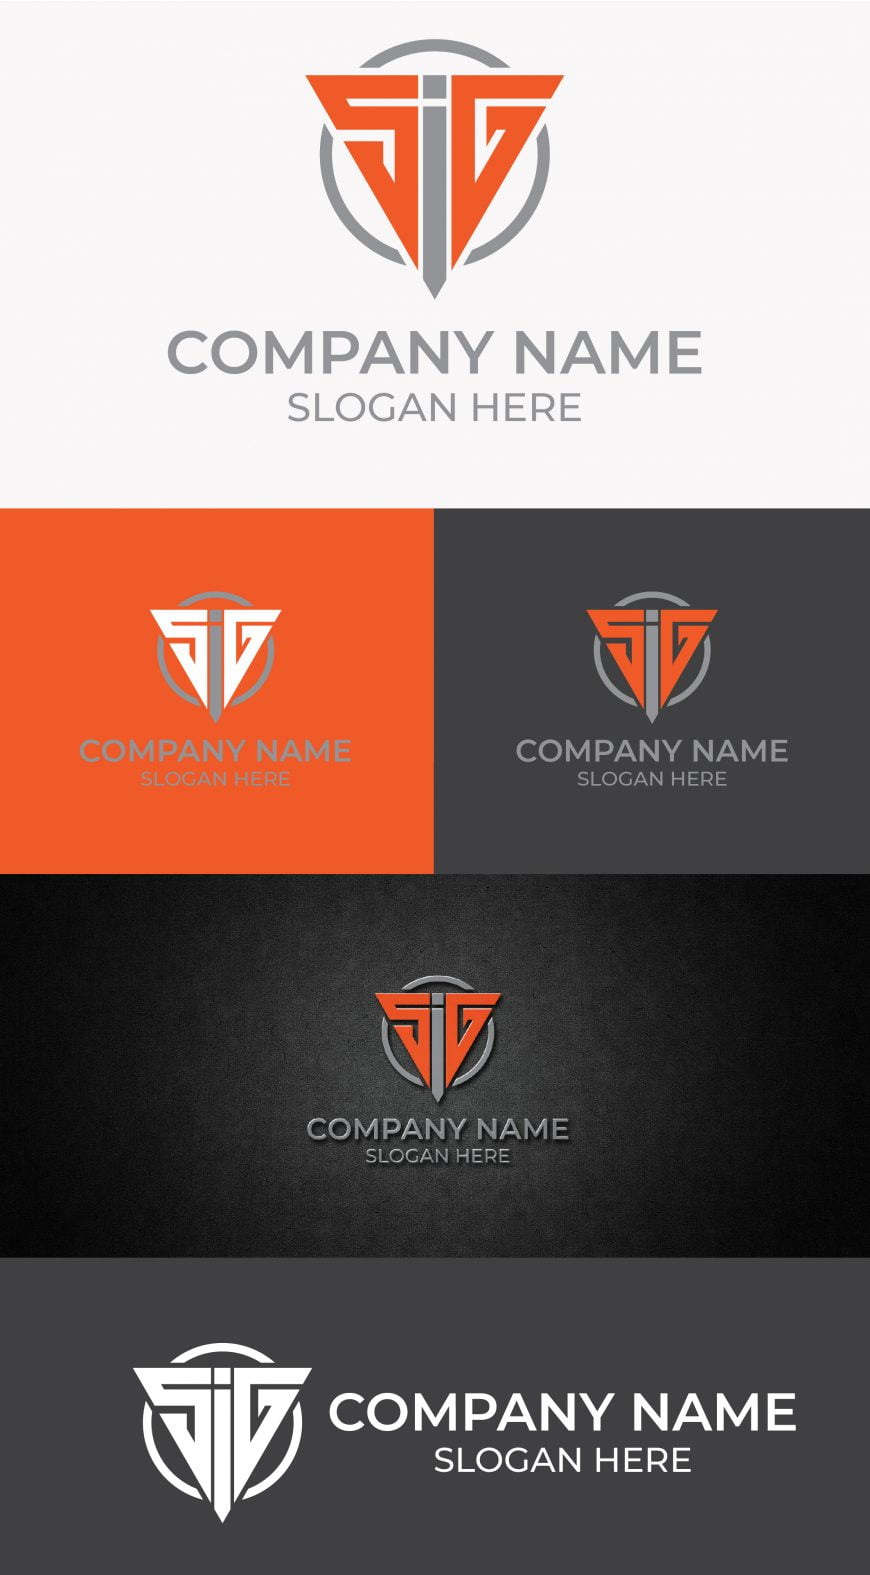 SIG-logo-Free-Template-scaled